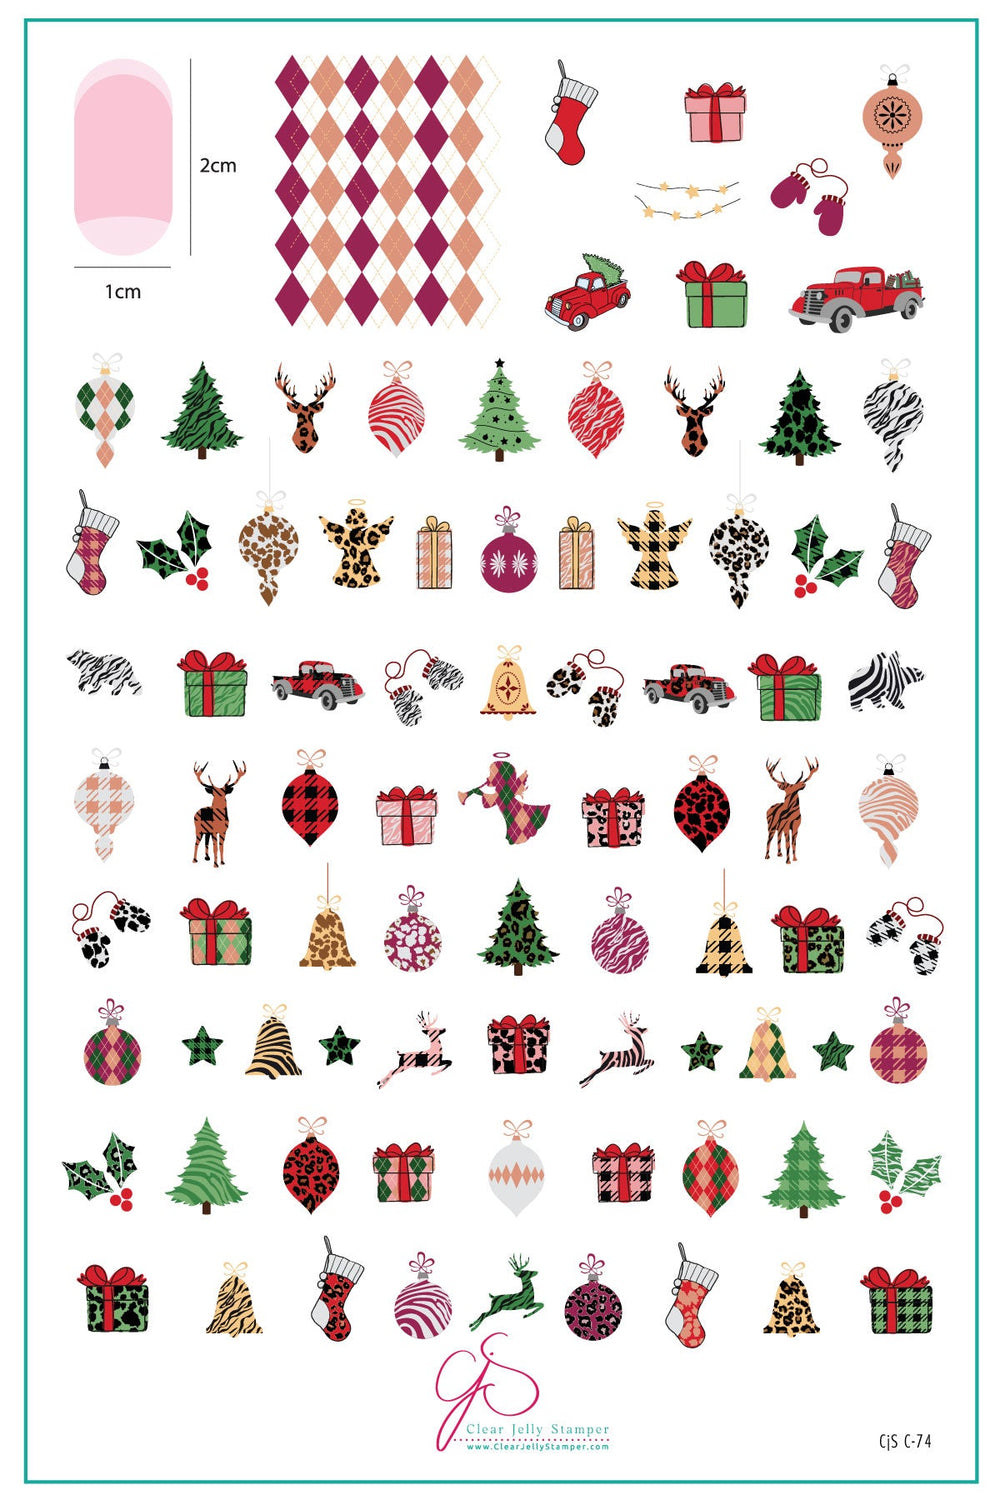 CjSC-074 -  Patterned Holidays 2.0  |  Clear Jelly Stamping Plate